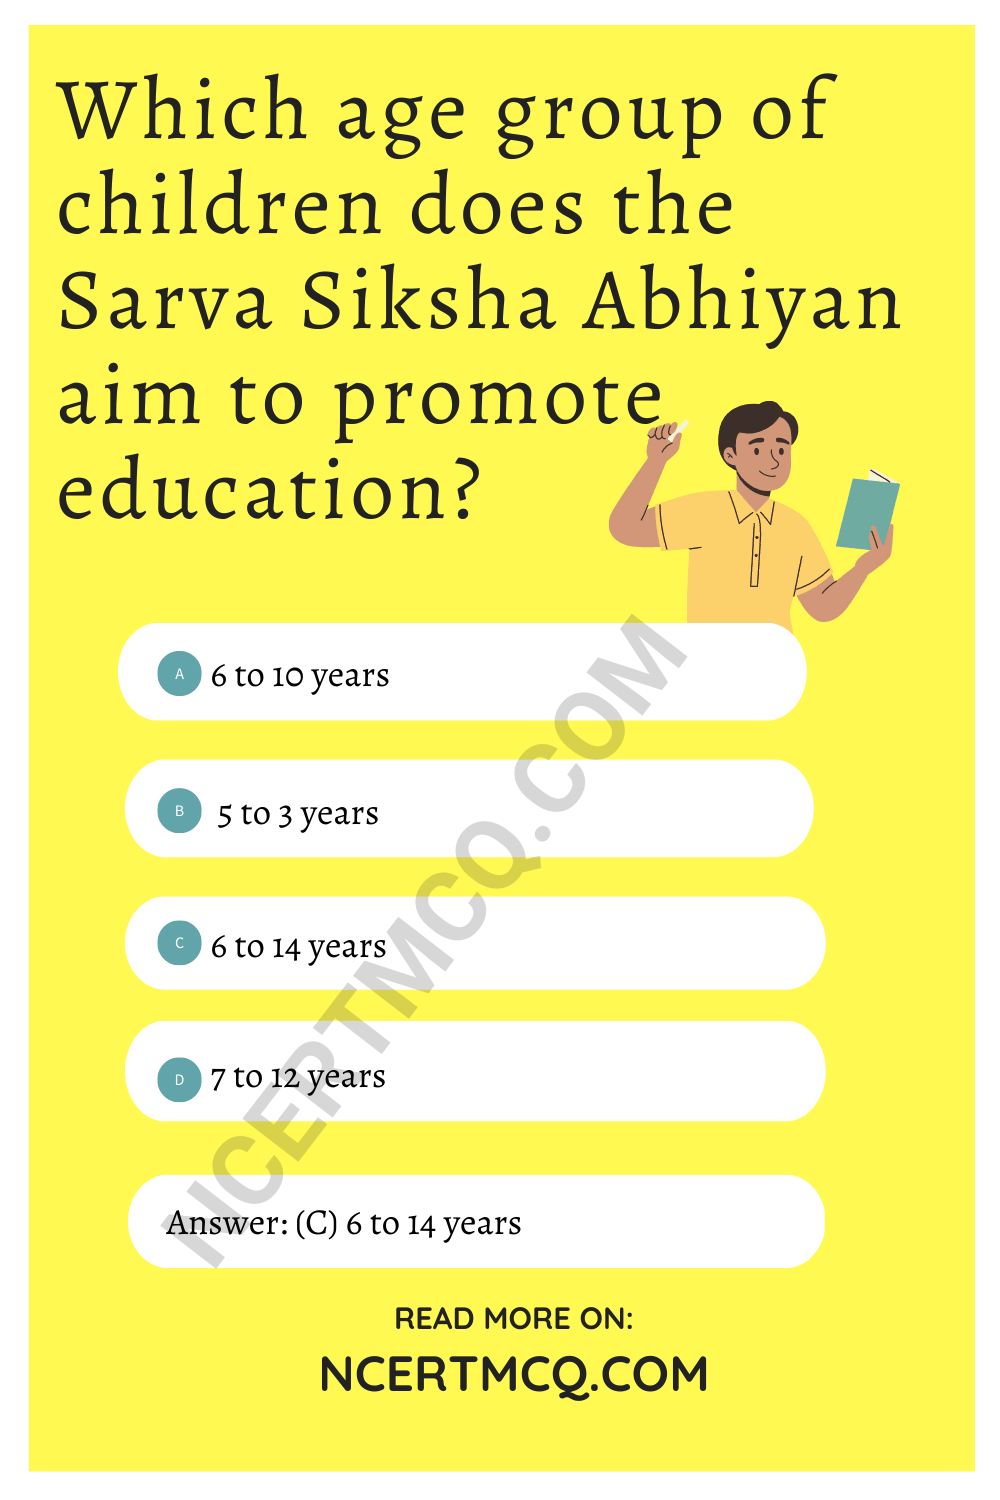 Which age group of children does the Sarva Siksha Abhiyan aim to promote education?